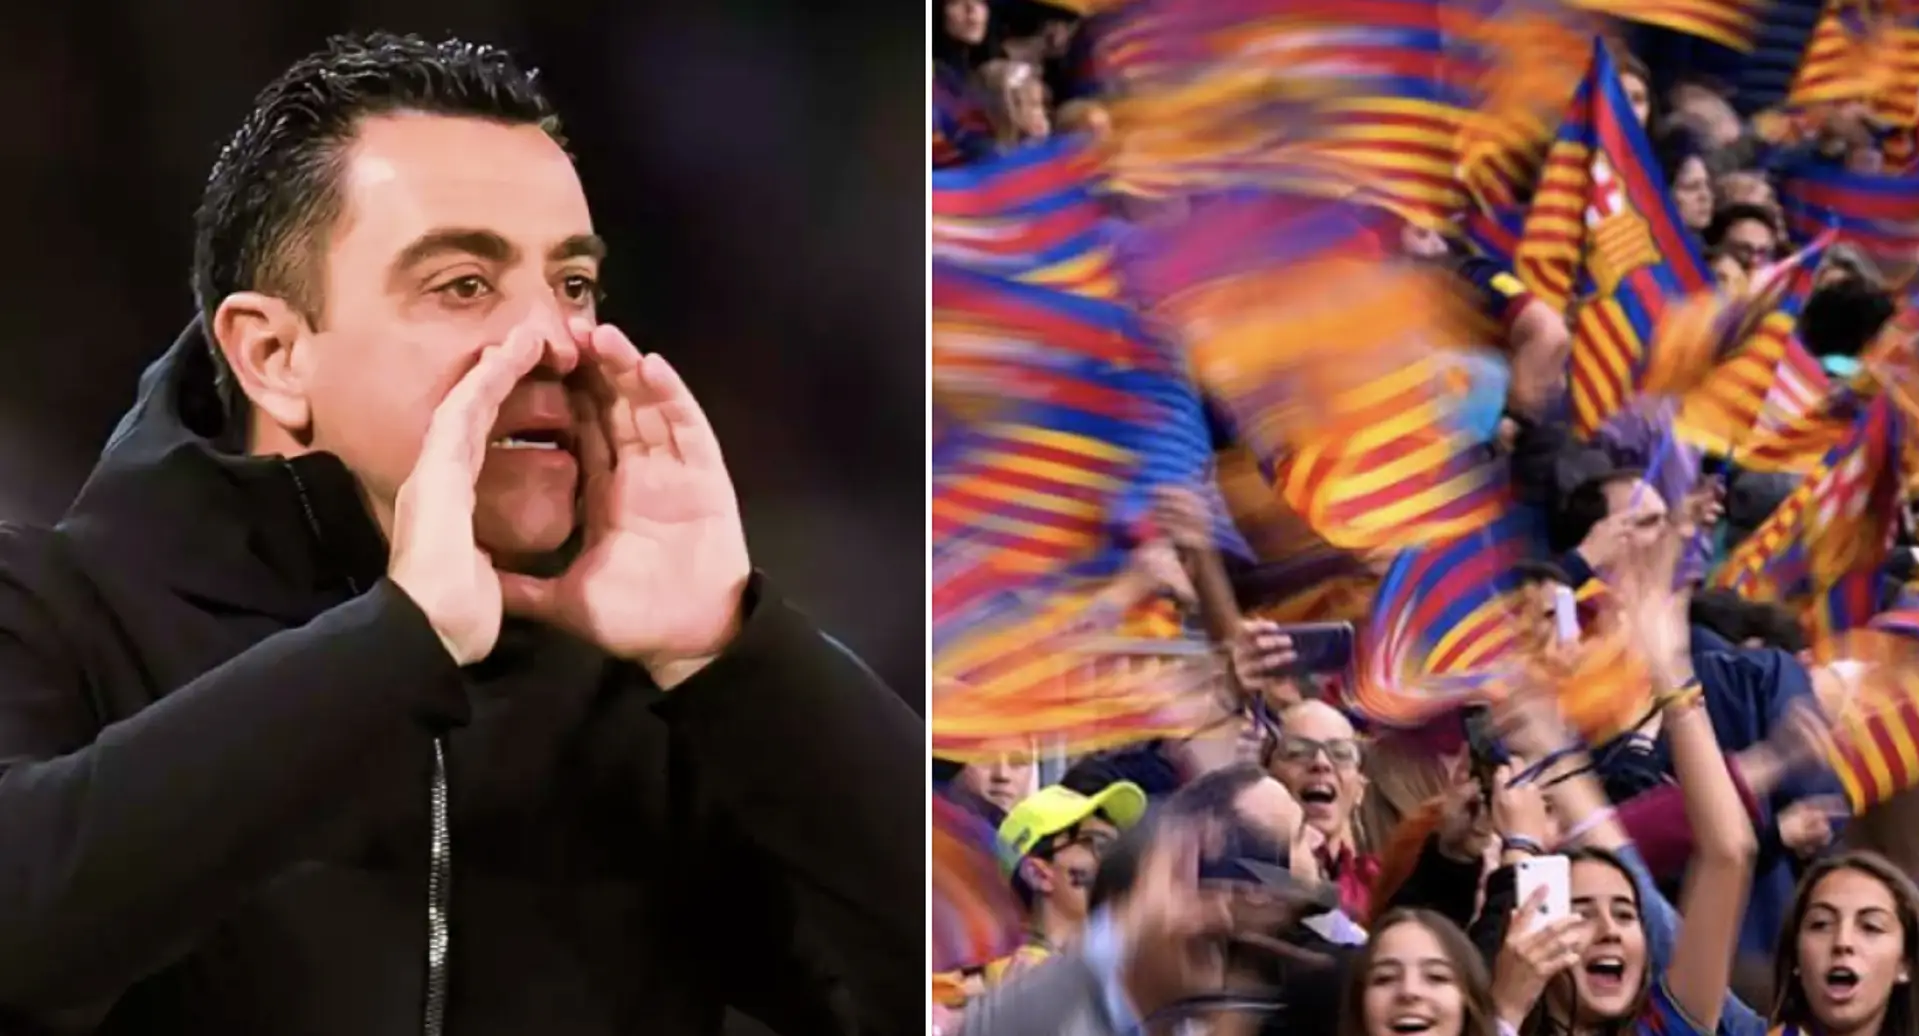 'Turn the stadium into a pressure cooker': Xavi's strong message to Barca fans ahead of crucial Napoli clash